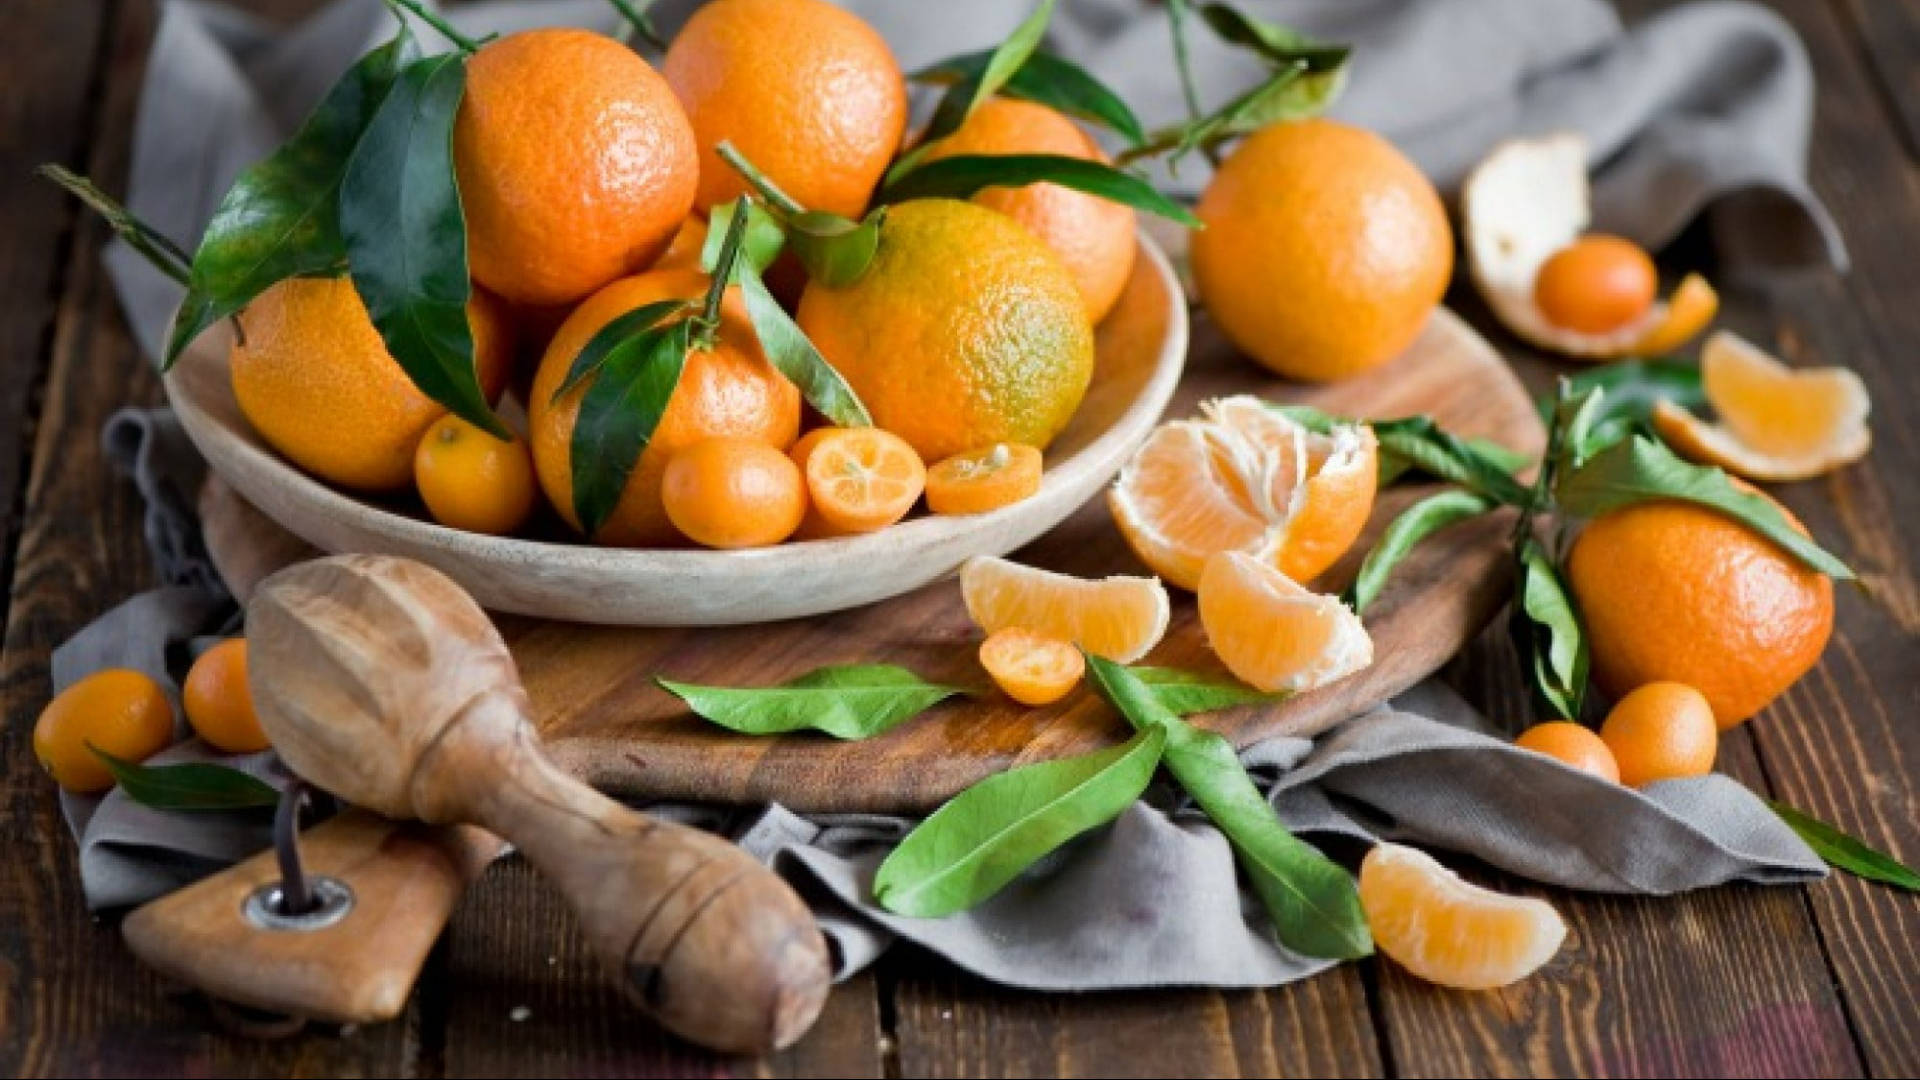 "Fresh Mandarin Oranges with a Wooden Juicer on a Table" Wallpaper